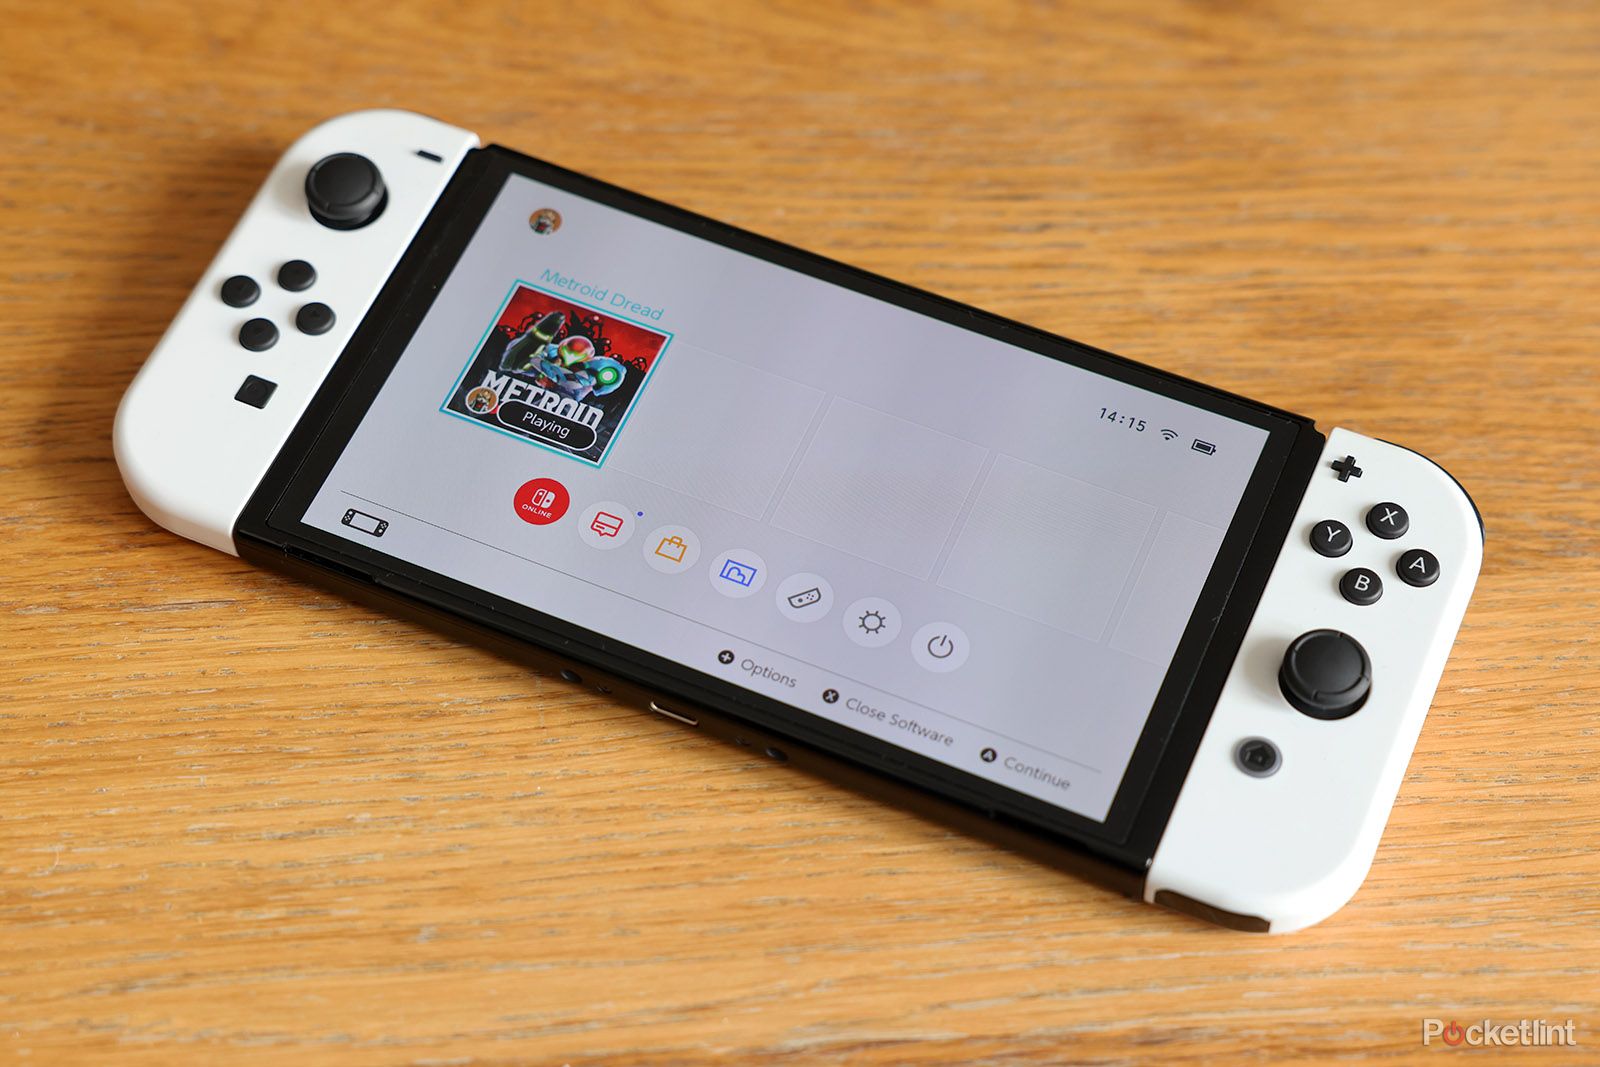 Nintendo admits that its next console generation is a “major concern